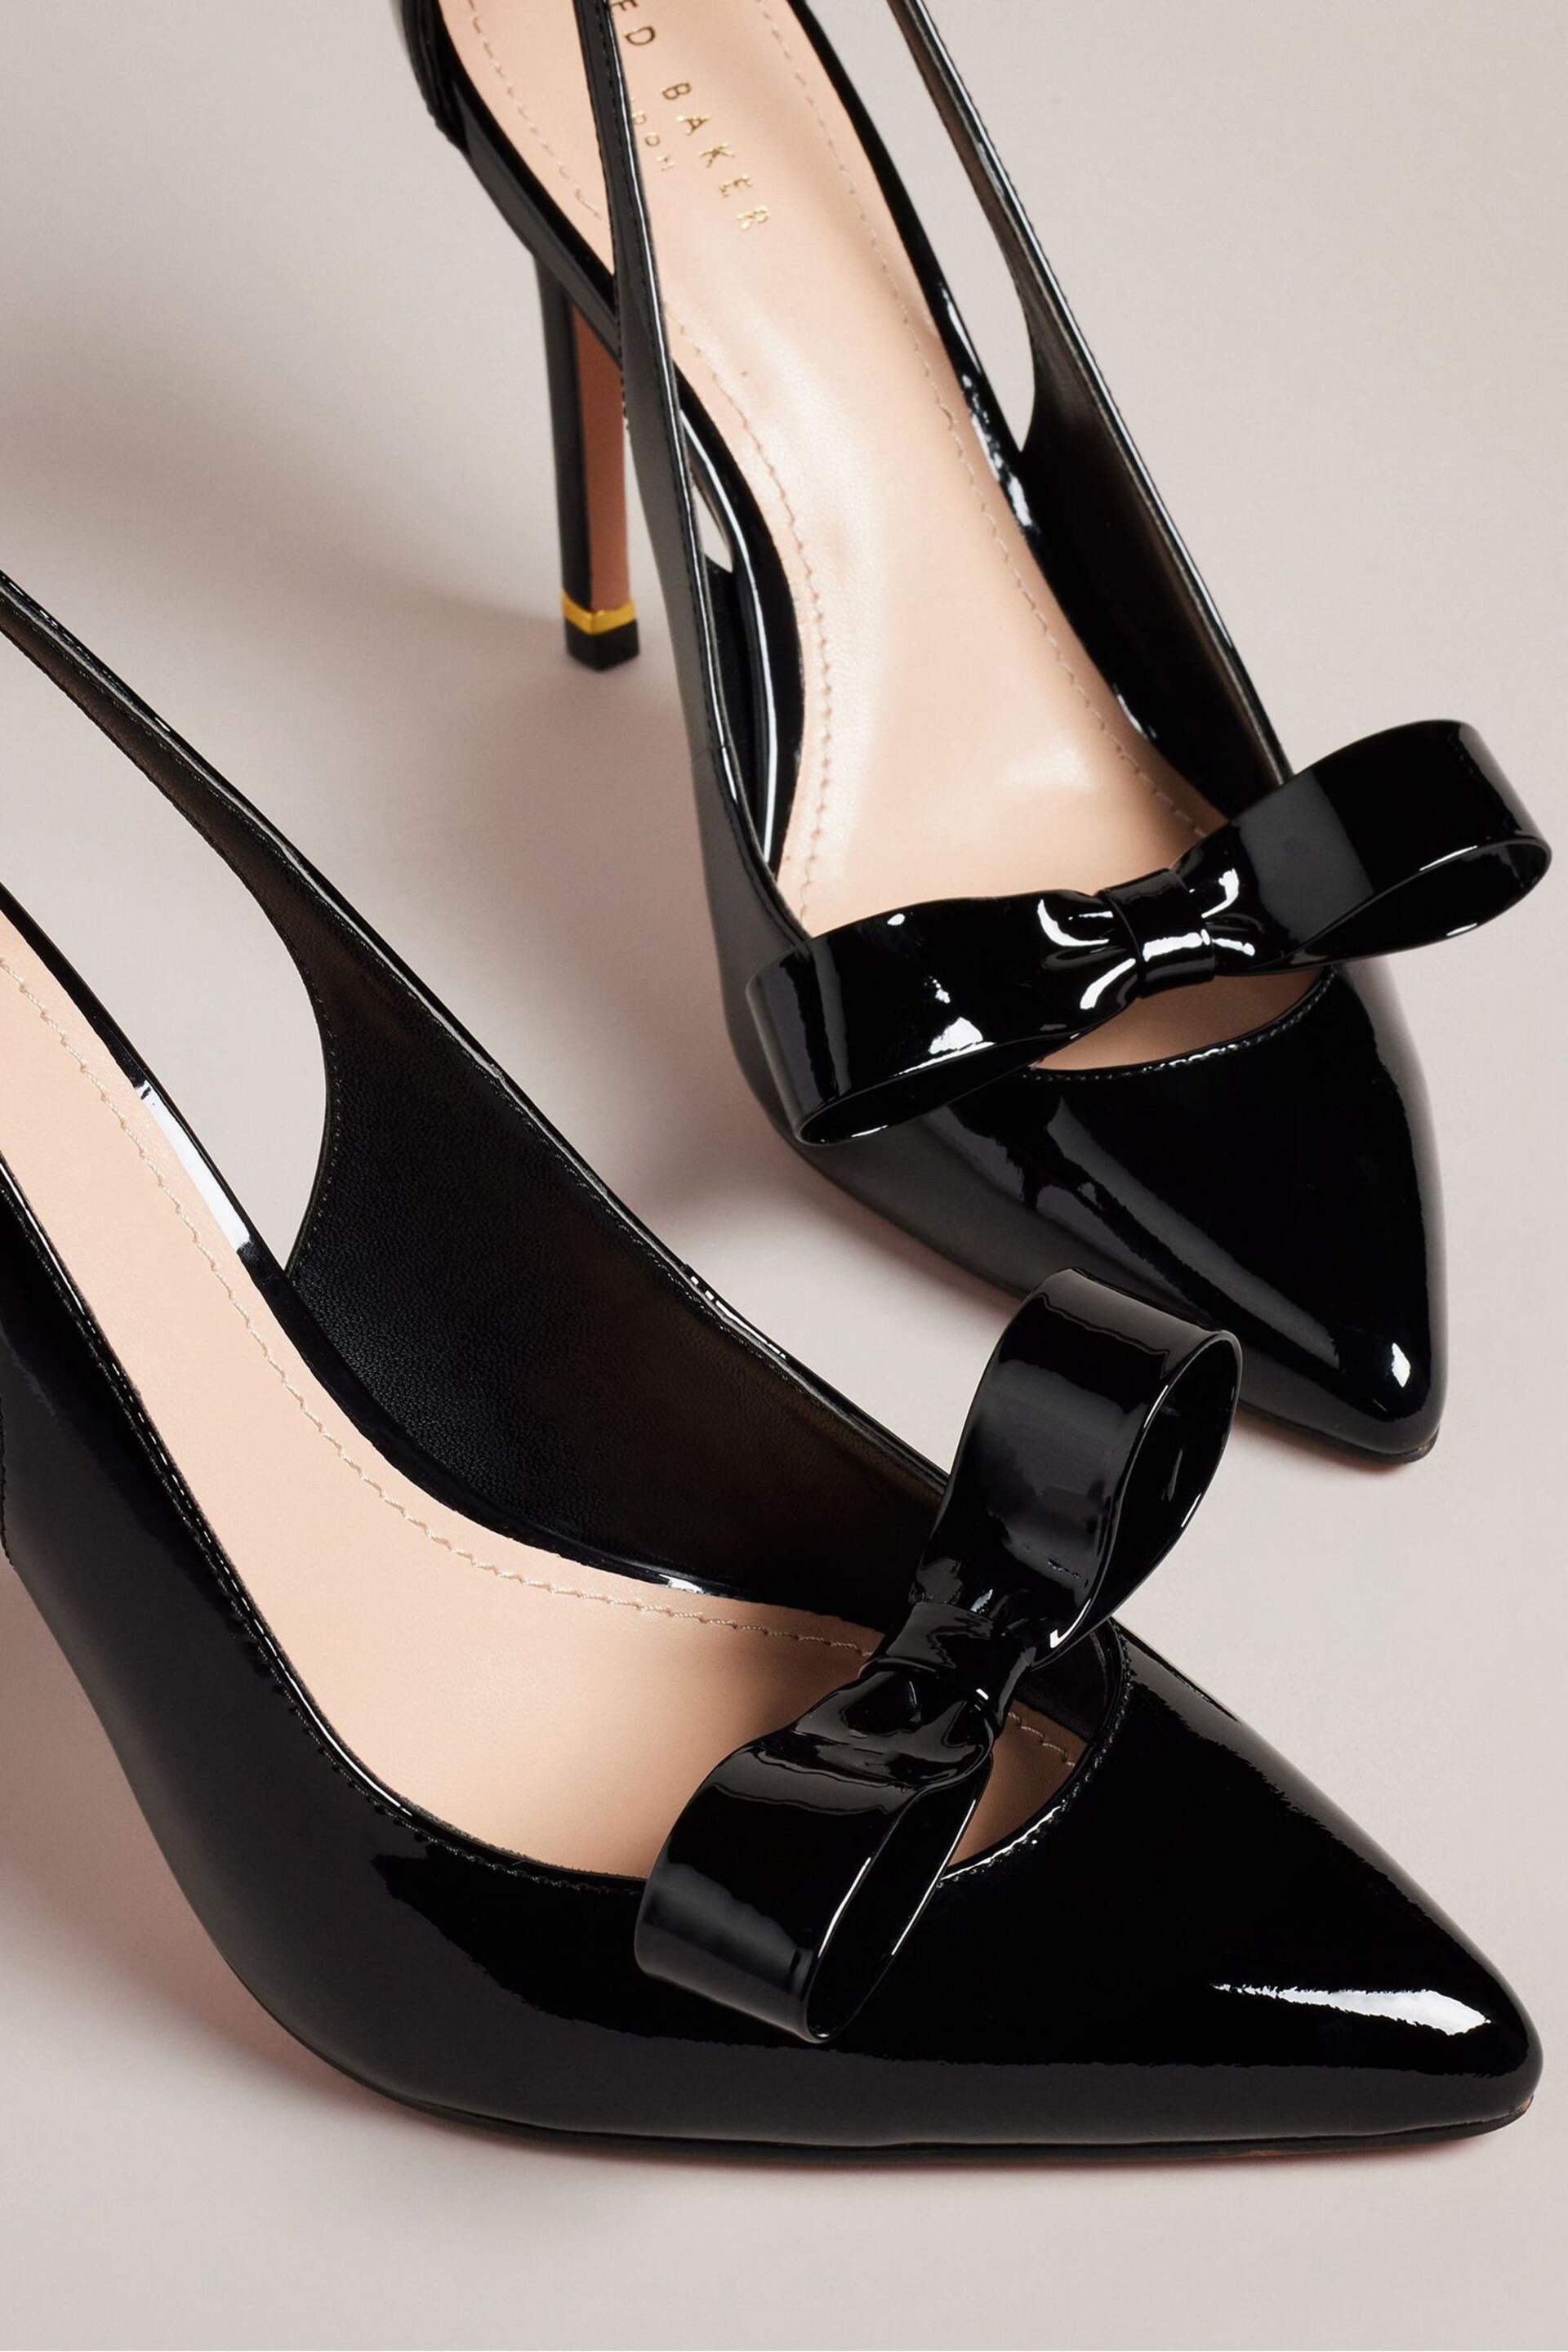 Ted Baker Black Orliney Patent Bow 100mm Cut-Out Detail Courts - Image 2 of 5